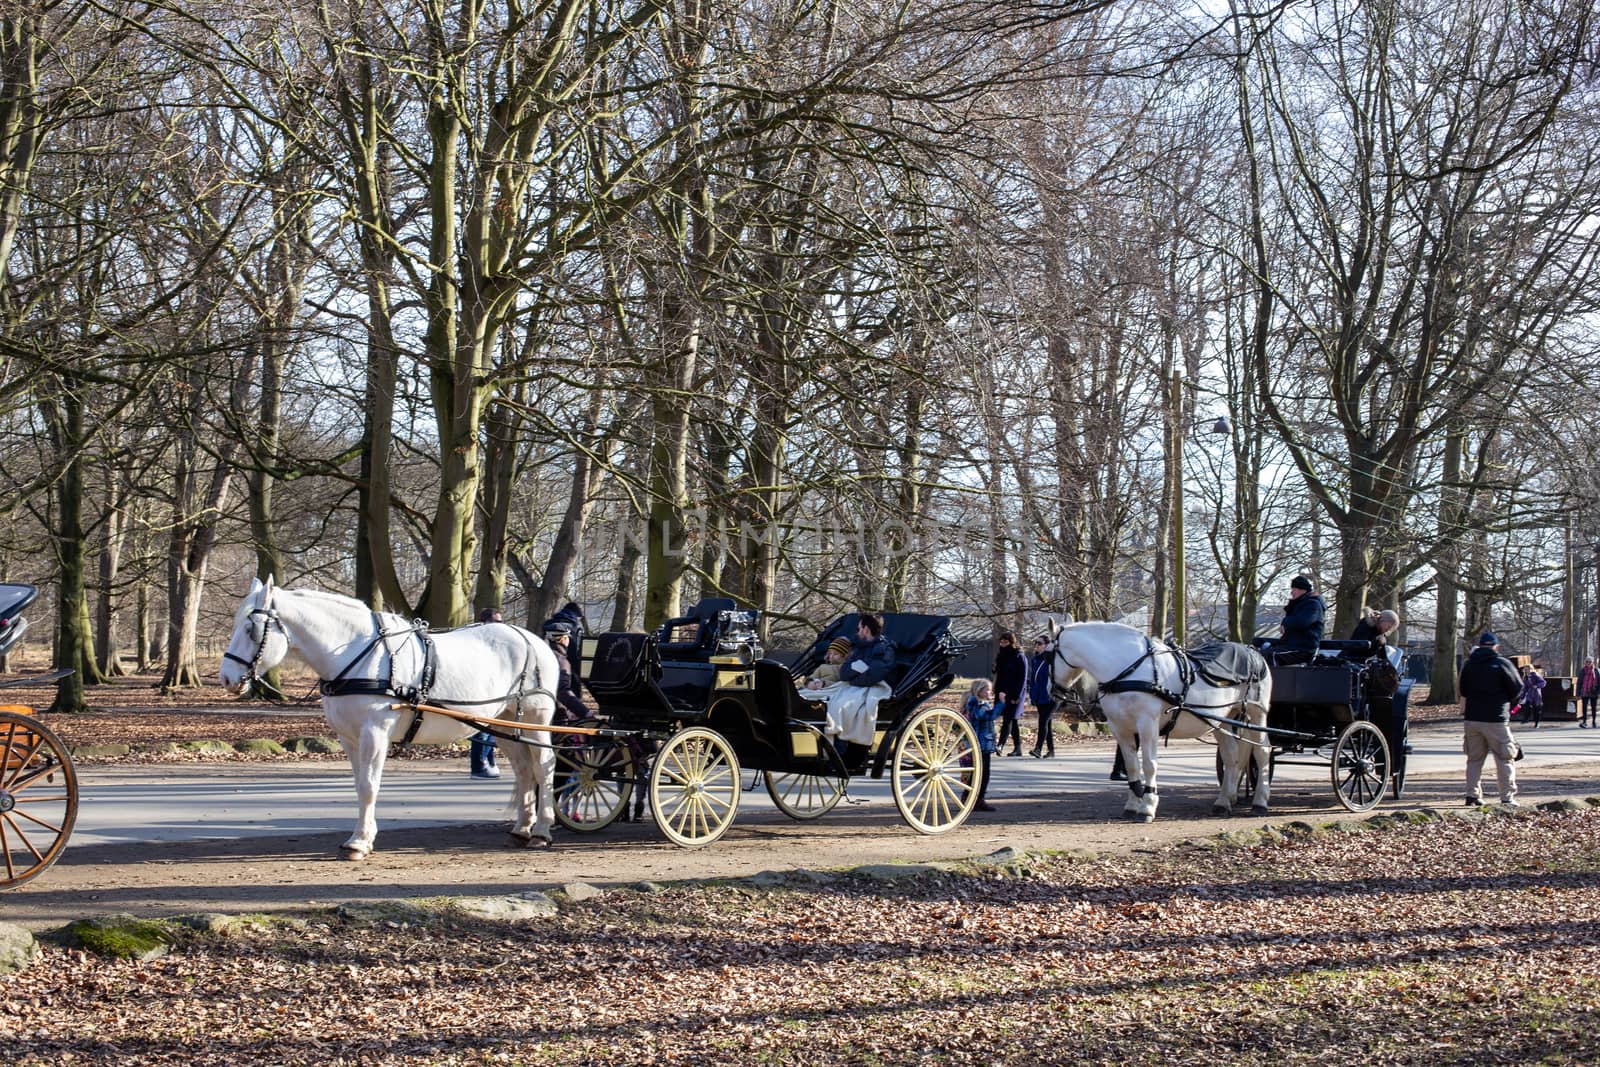 Horse-drawn carriages in Dyrehaven in Copenhagen by oliverfoerstner